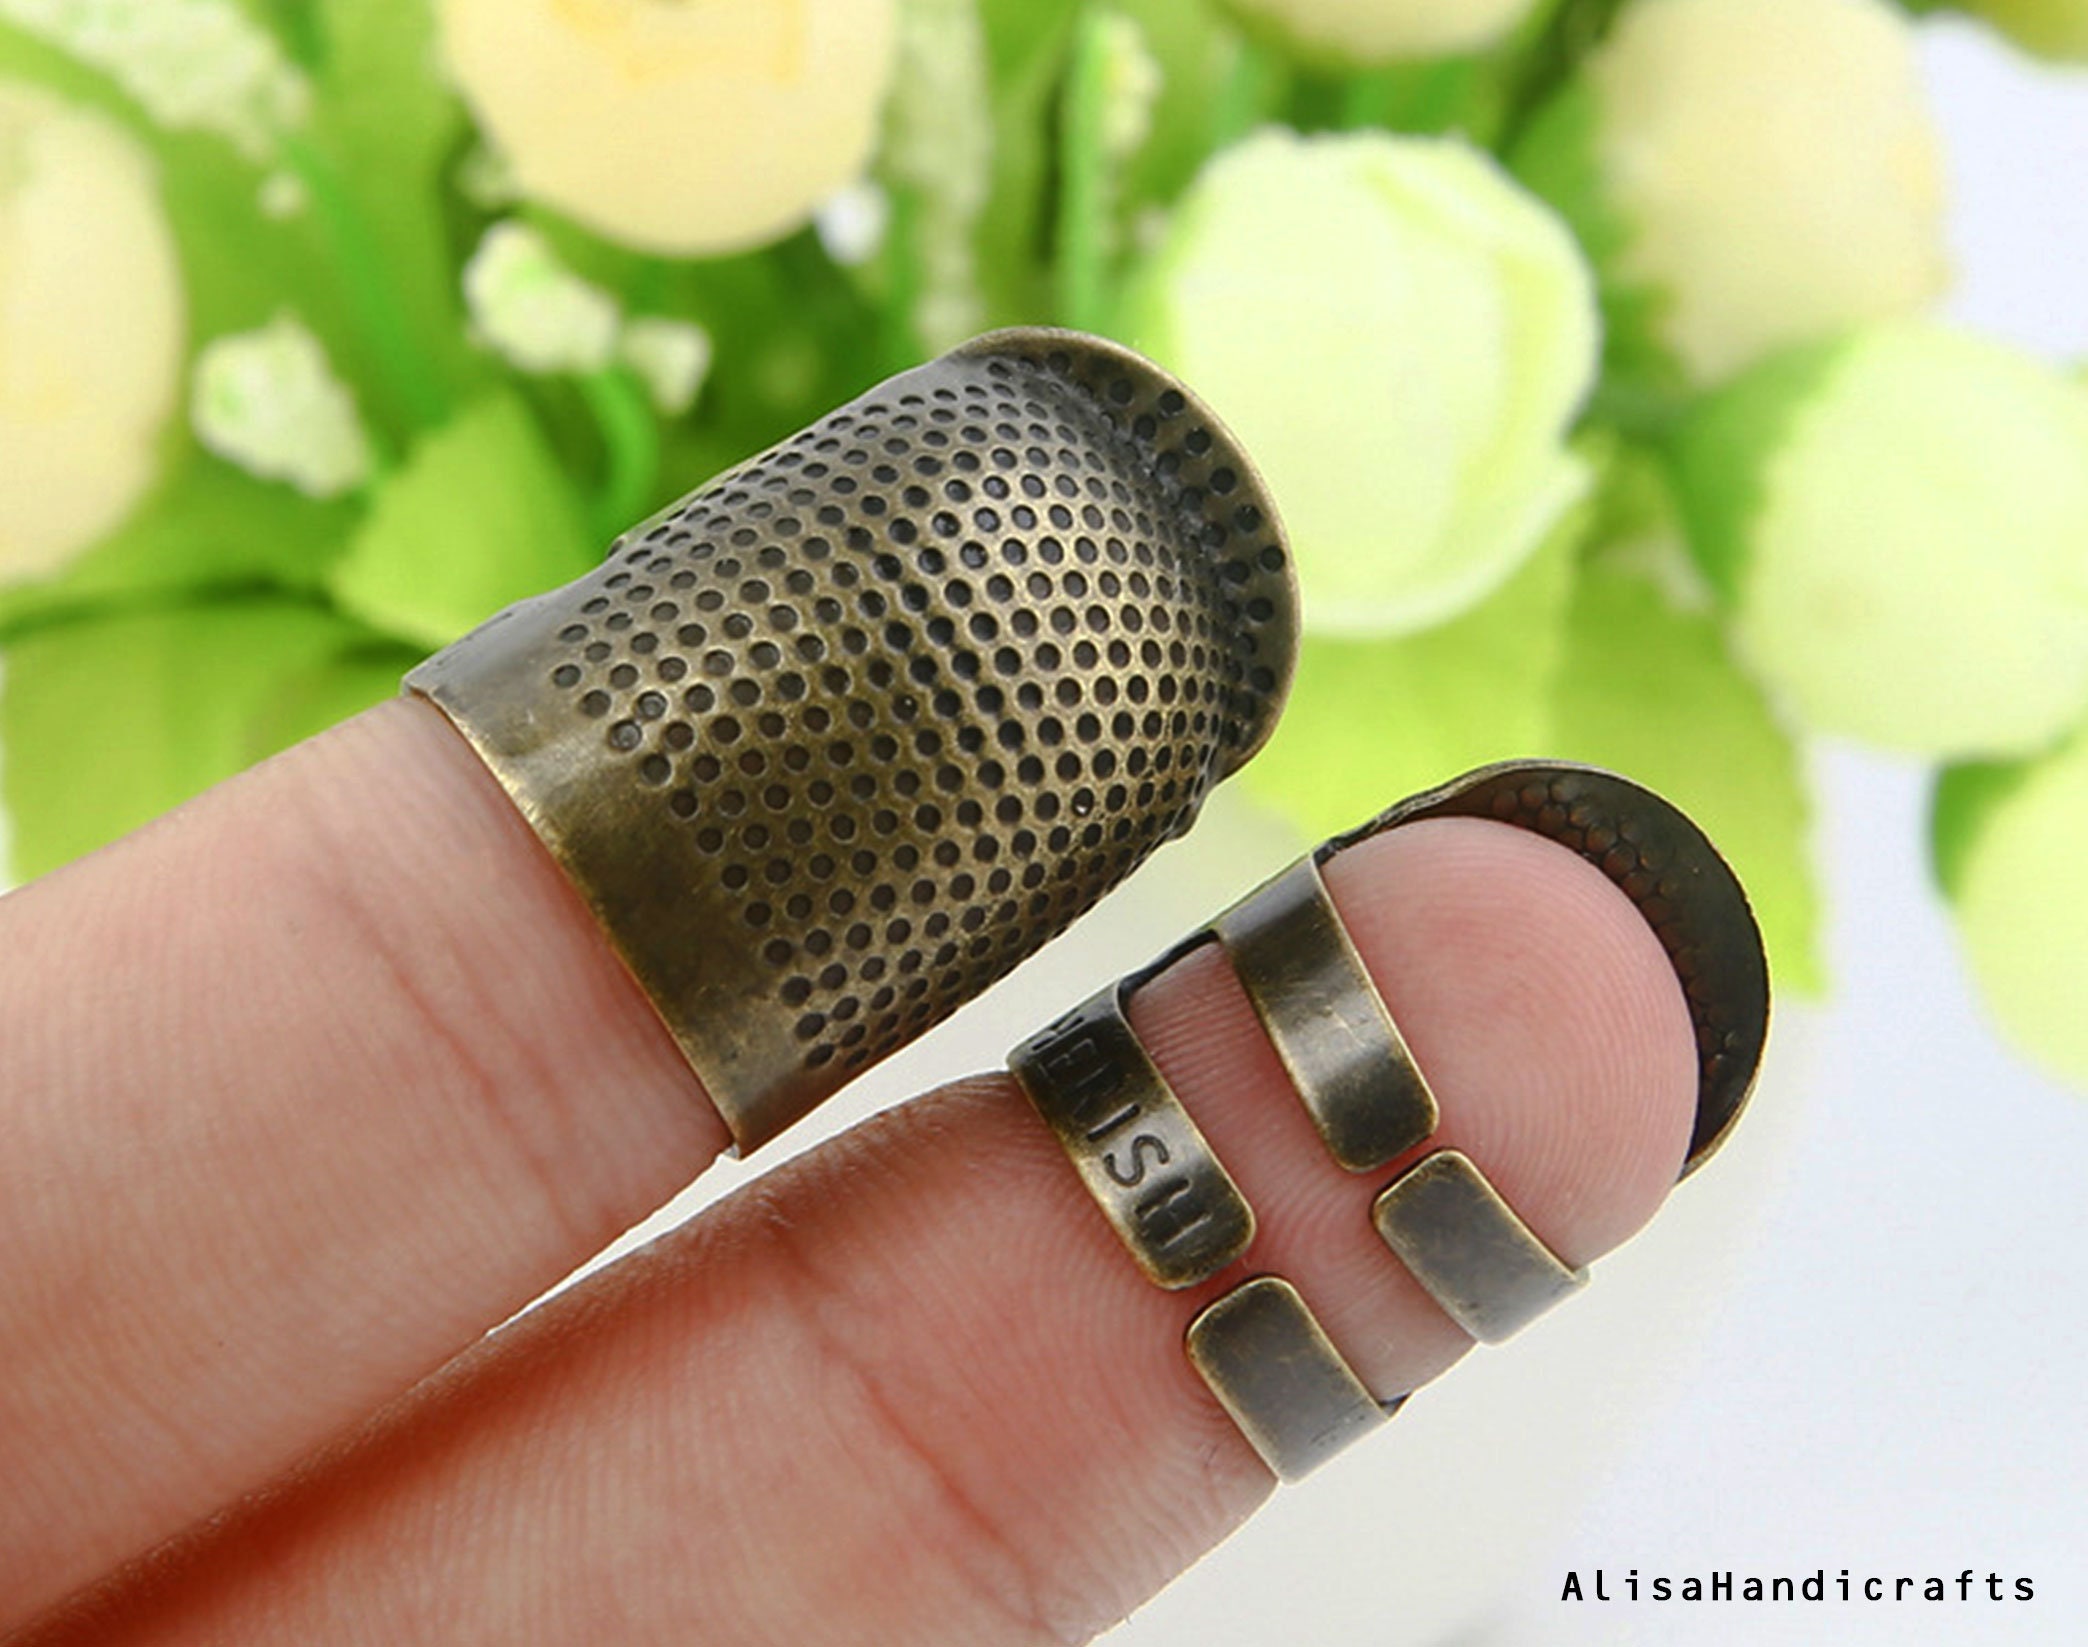 XTBOCA, Genuine Leather Coin Thimble, Finger Protector, Thimble for Hand  Sewing, Sewing Leather, Quilting Embroidery, DIY Sewing  Tools,Handmade,Crazy